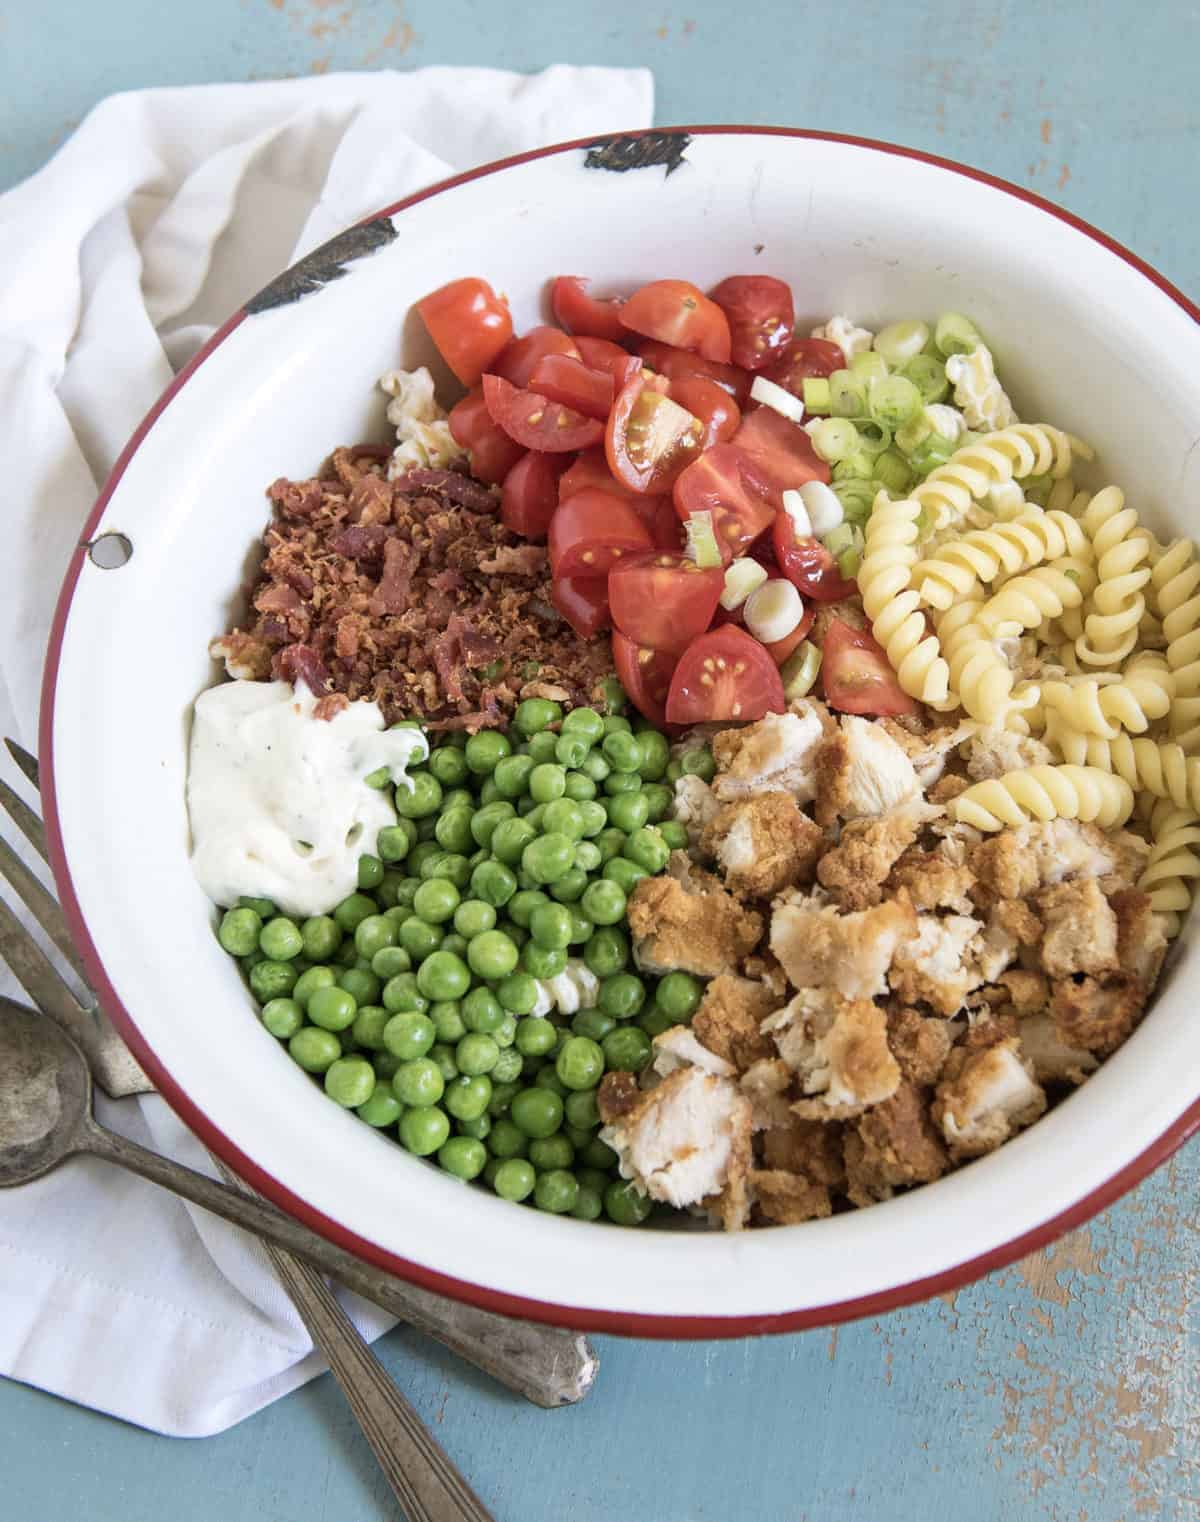 8 of my favorite pasta salad recipes plus tips and tricks on making the best pasta salad ever. BLT, Asian, Italian, Pesto, and more!